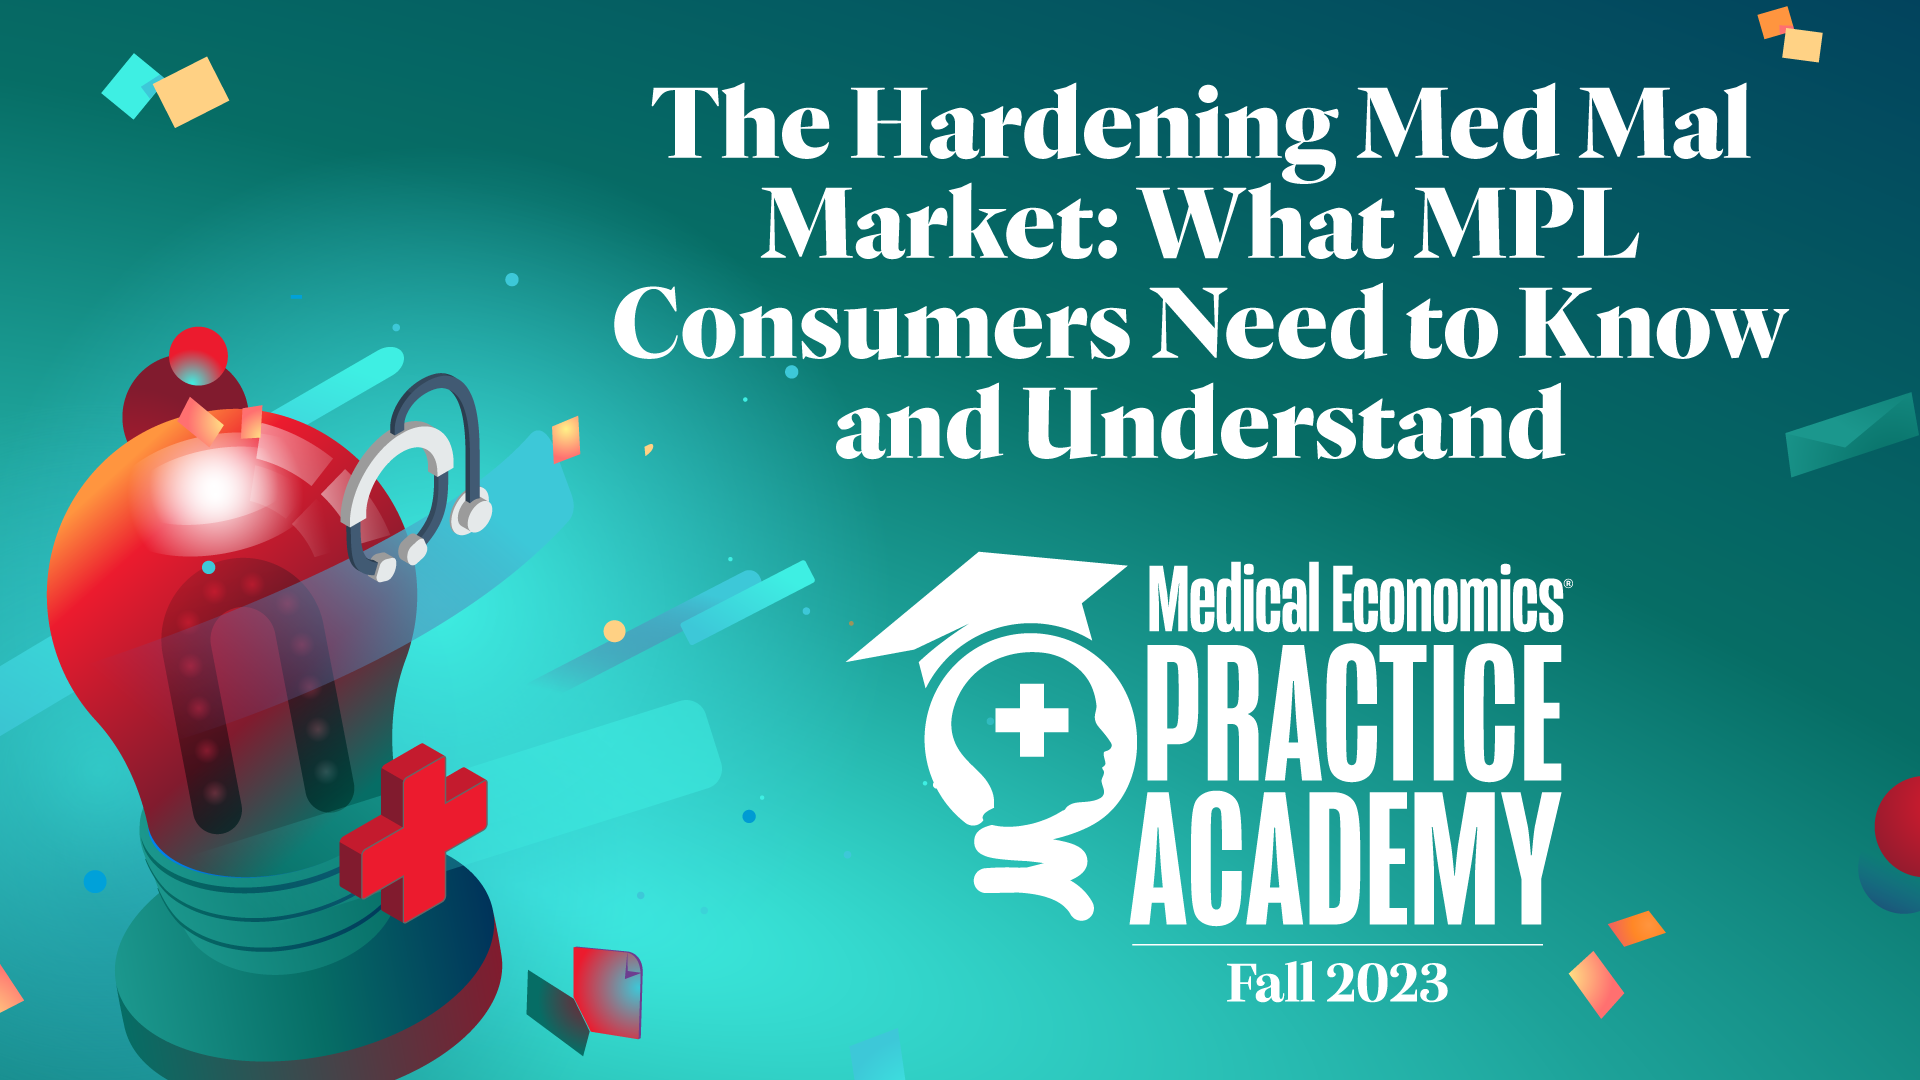 The Hardening Med Mal Market: What MPL Consumers Need to Know and Understand